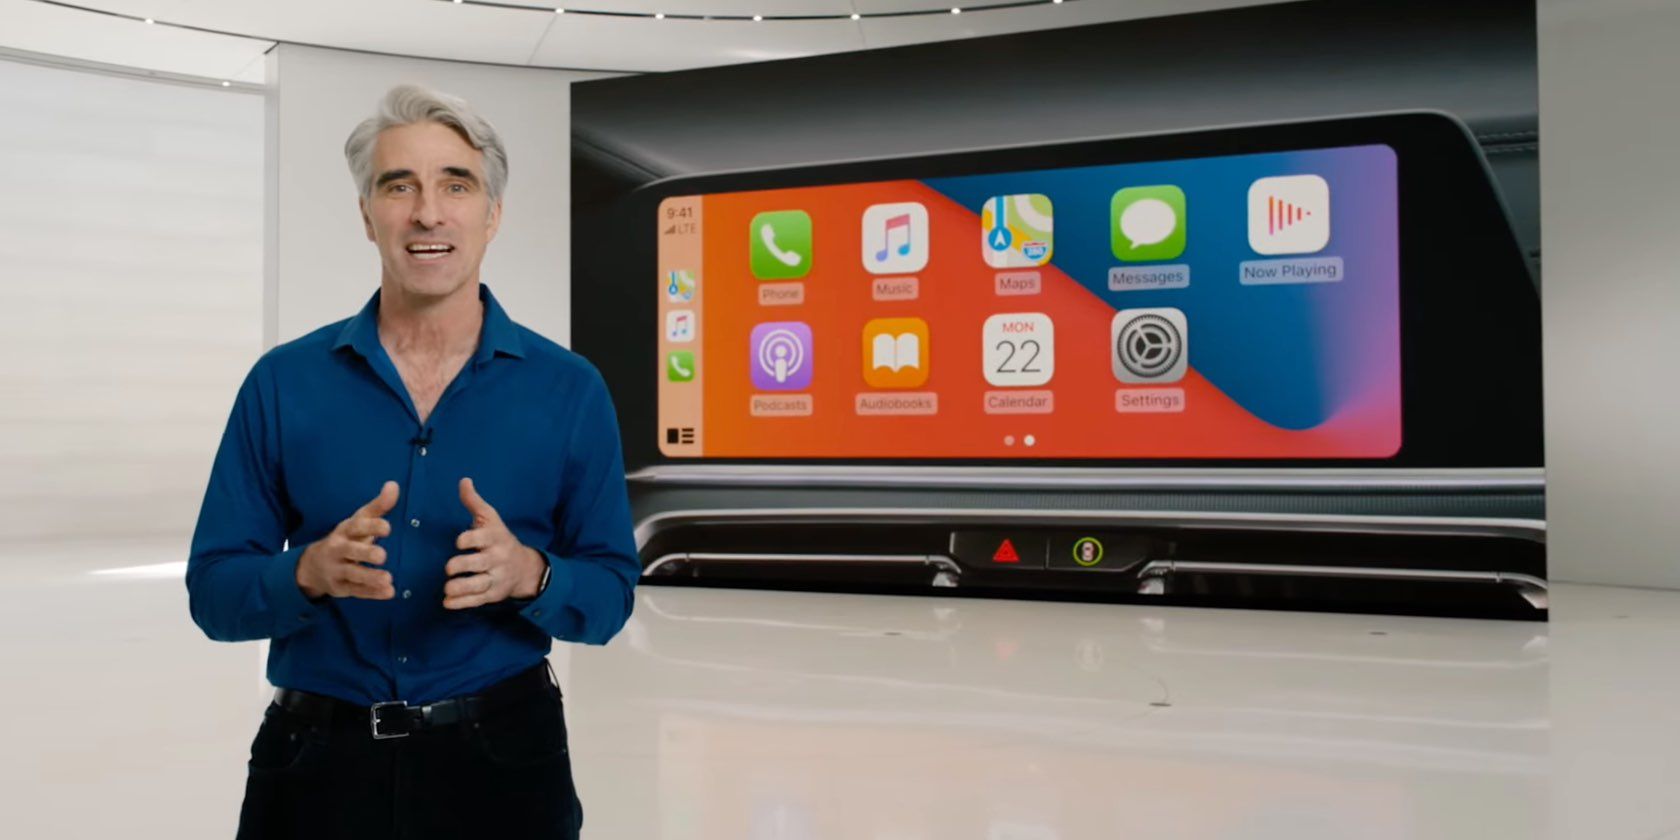 A still from the prerecorded WWDC 2020 presentation showing Craig Federighi, Apple's Senior Vice President of Software Engineering, in front of a CarPlay slide